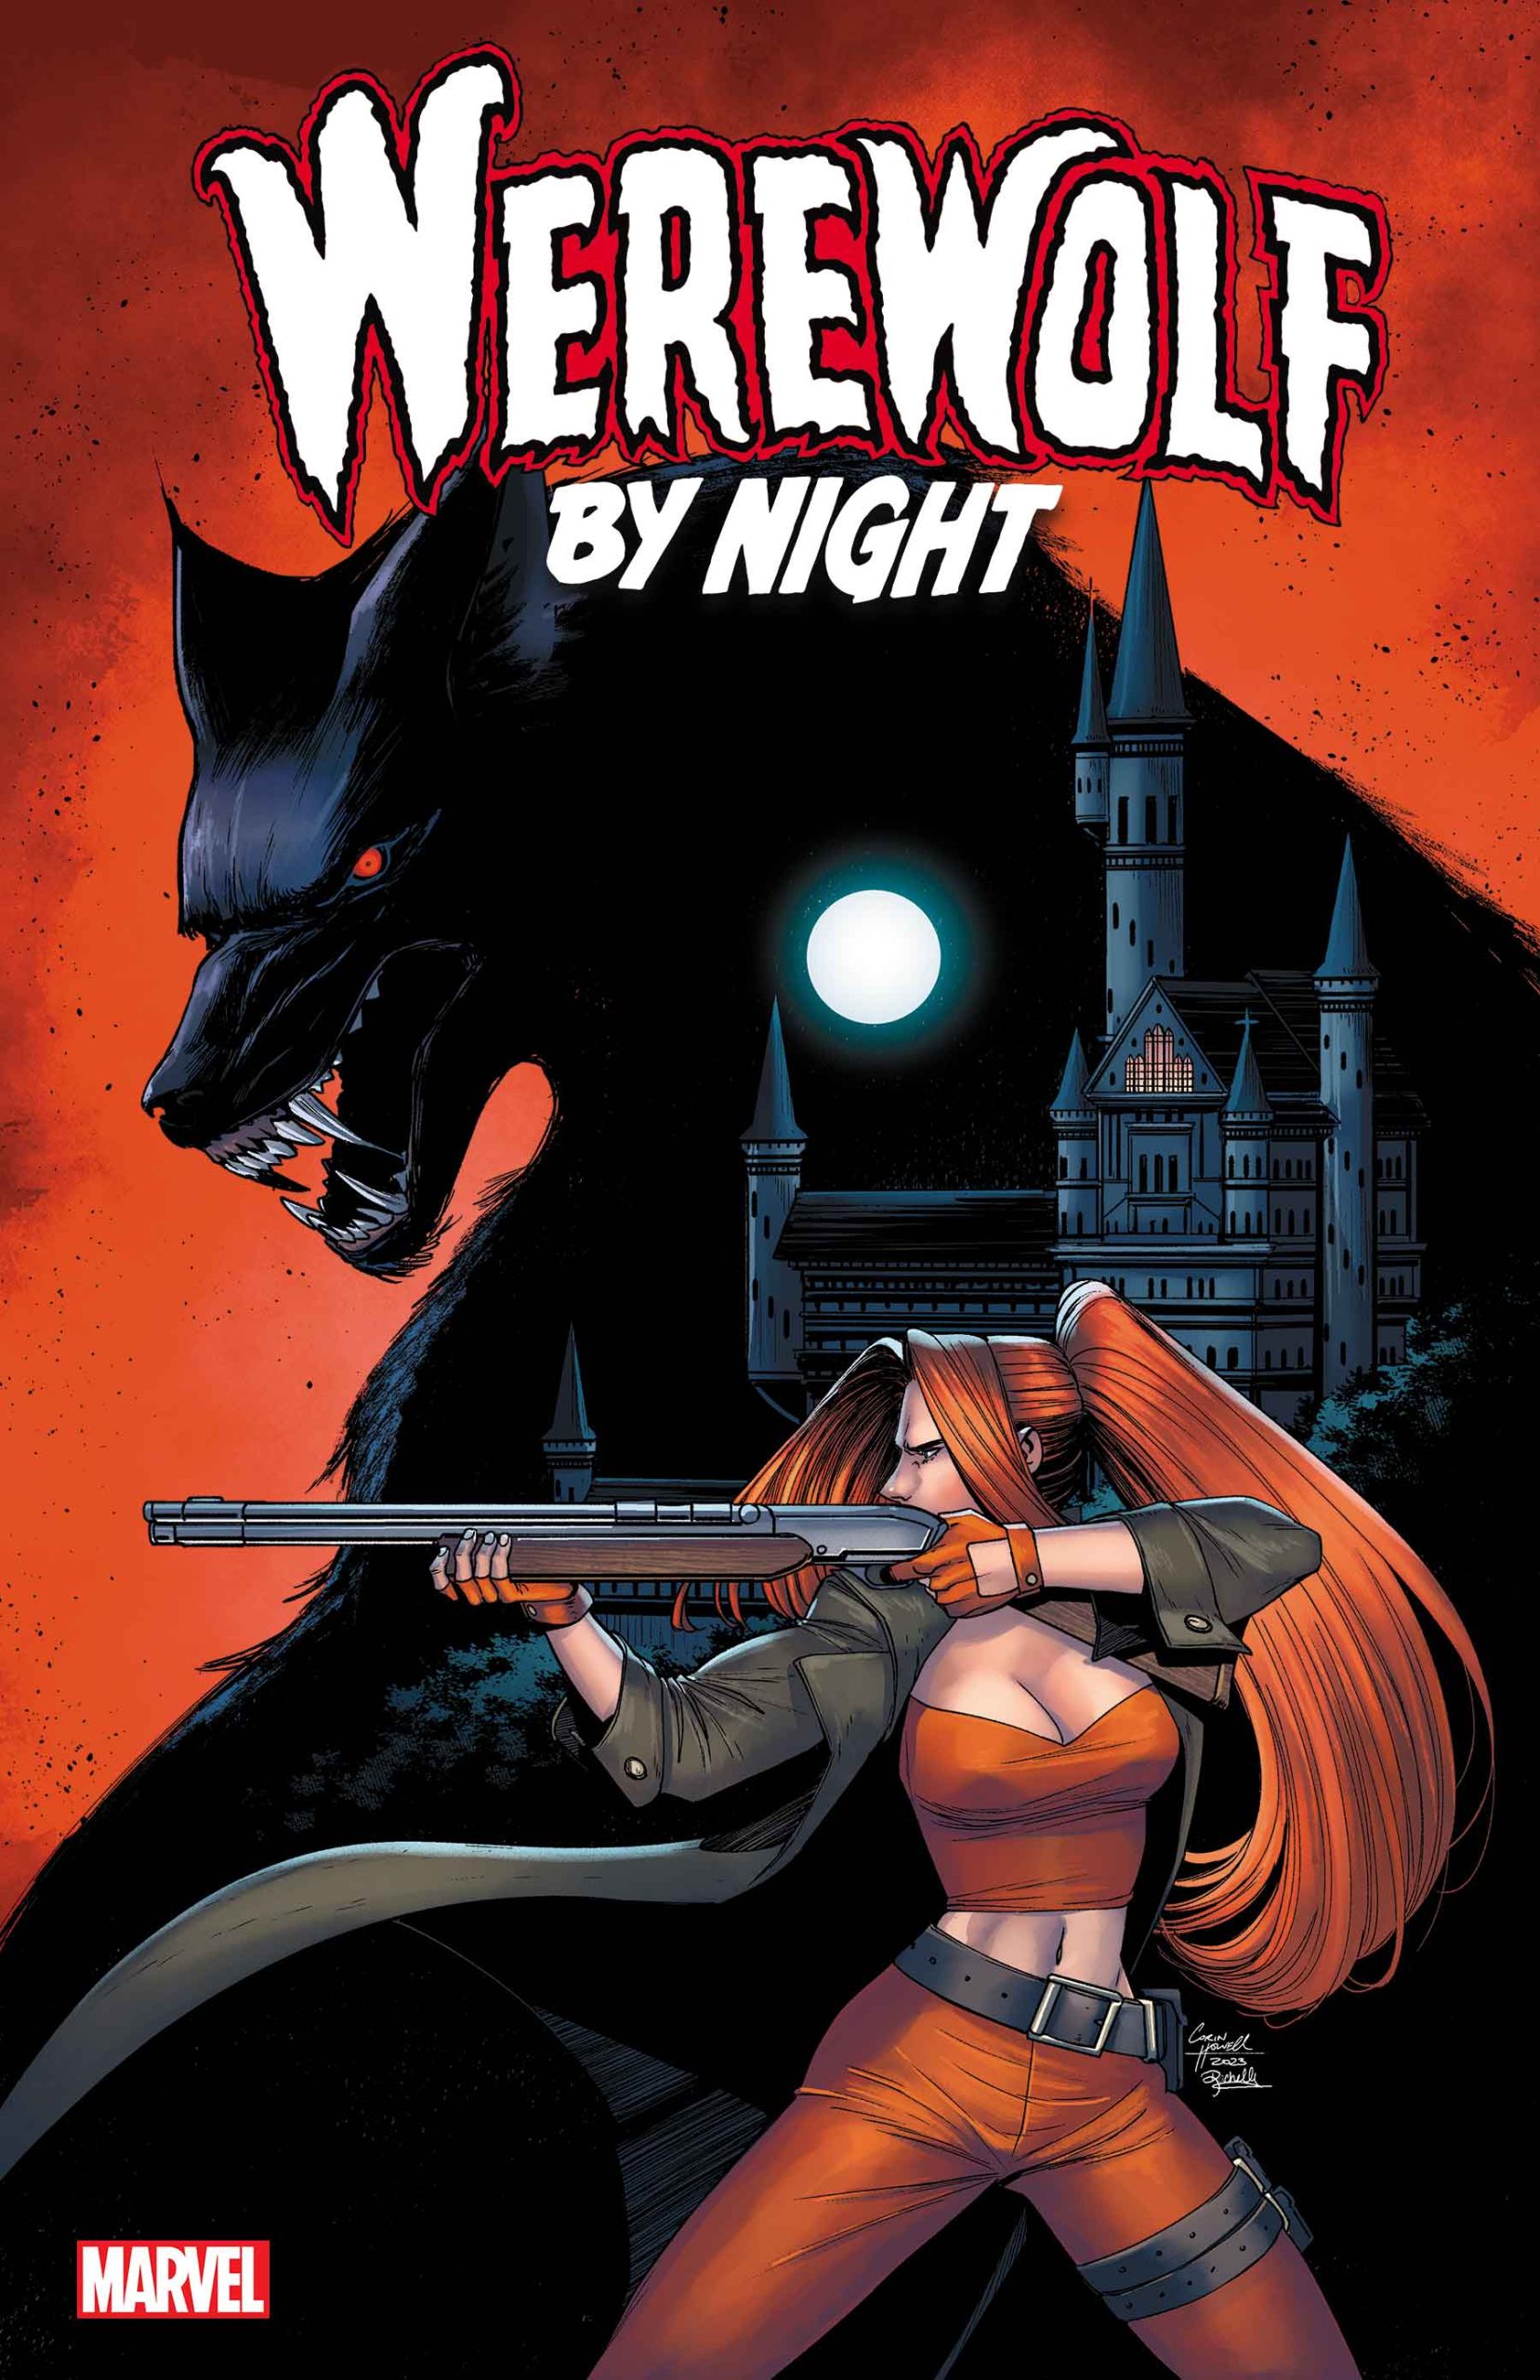 Werewolf by Night #1 cover art by Corin Howell